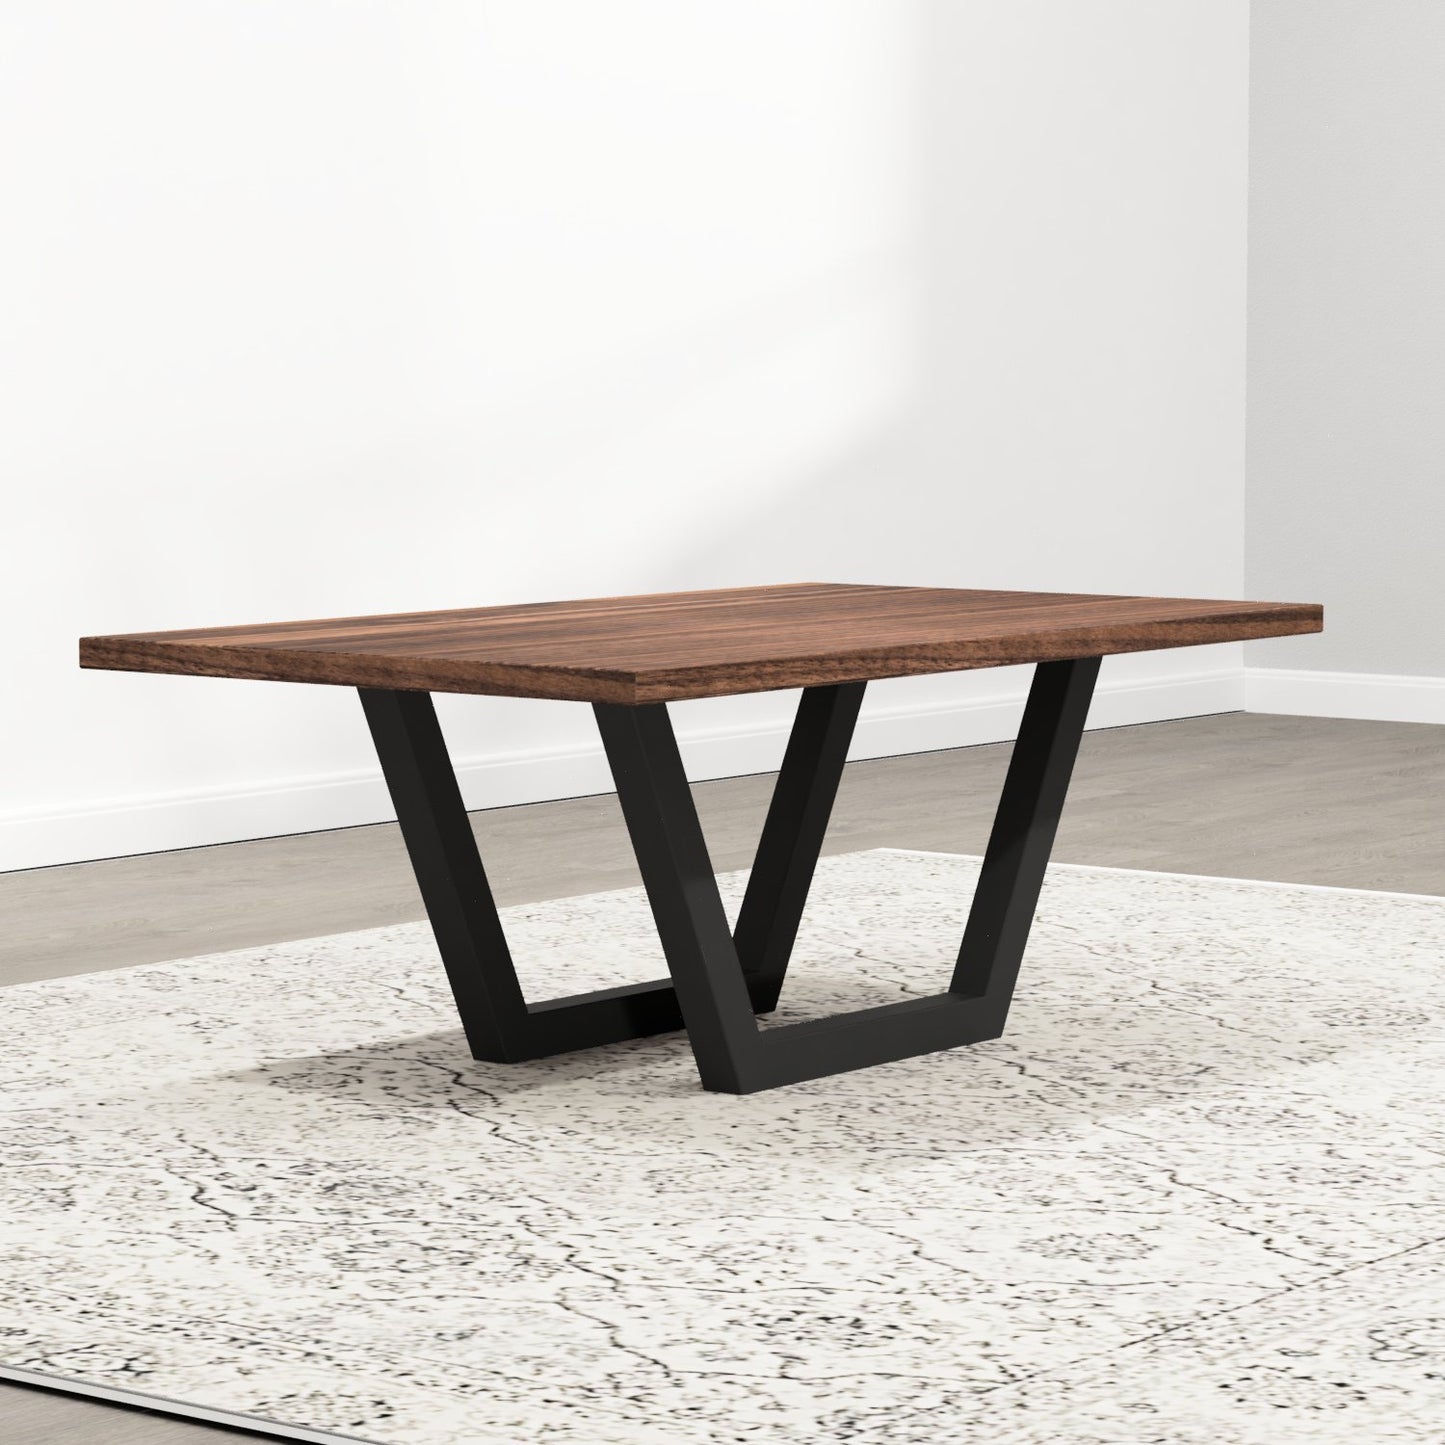 The Addison Coffee Table - FargoWoodworks